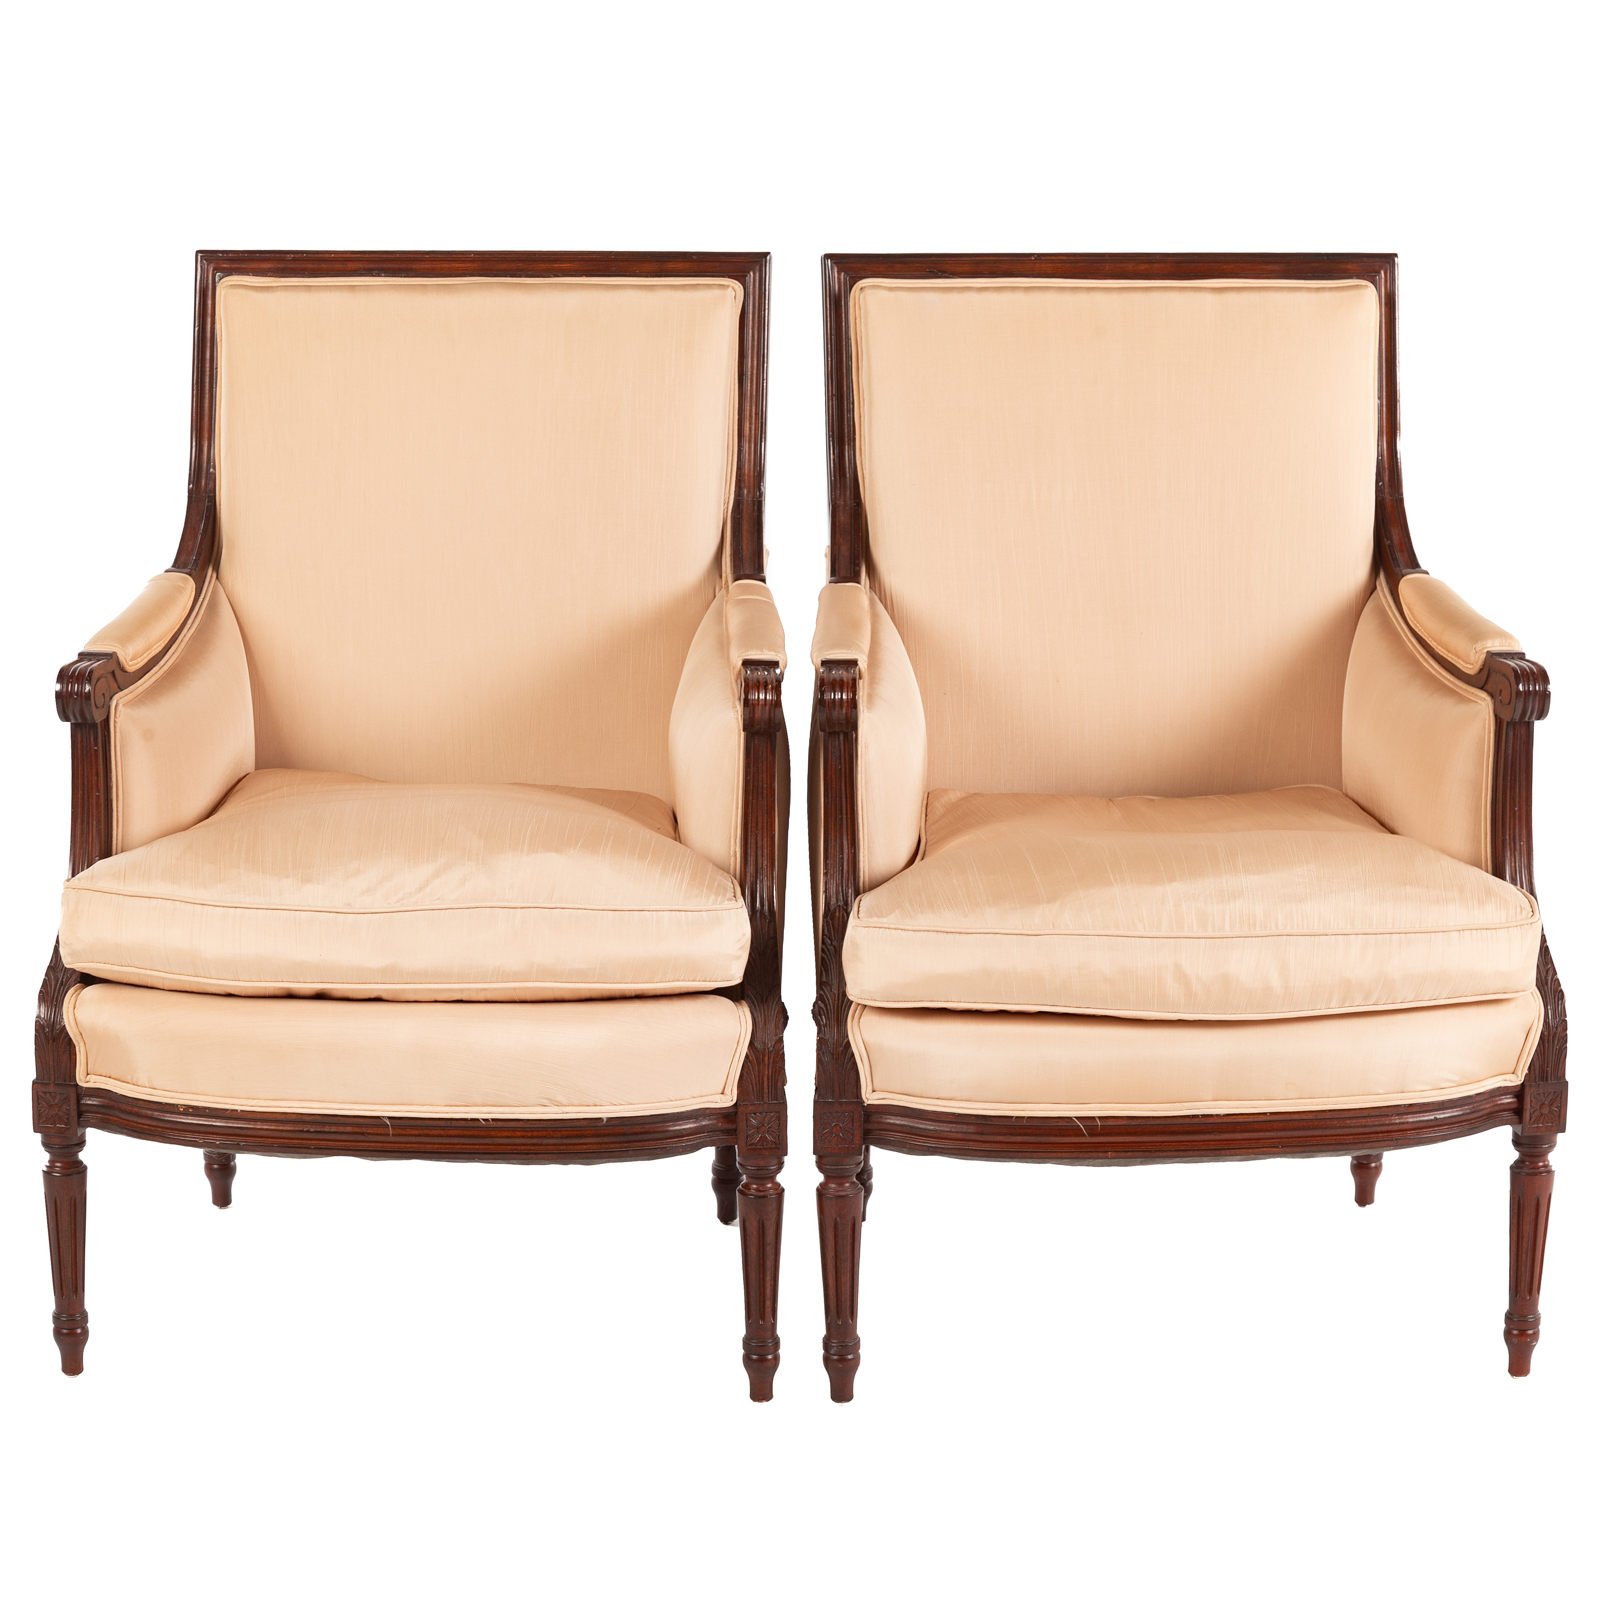 A PAIR OF REGENCY STYLE UPHOLSTERED